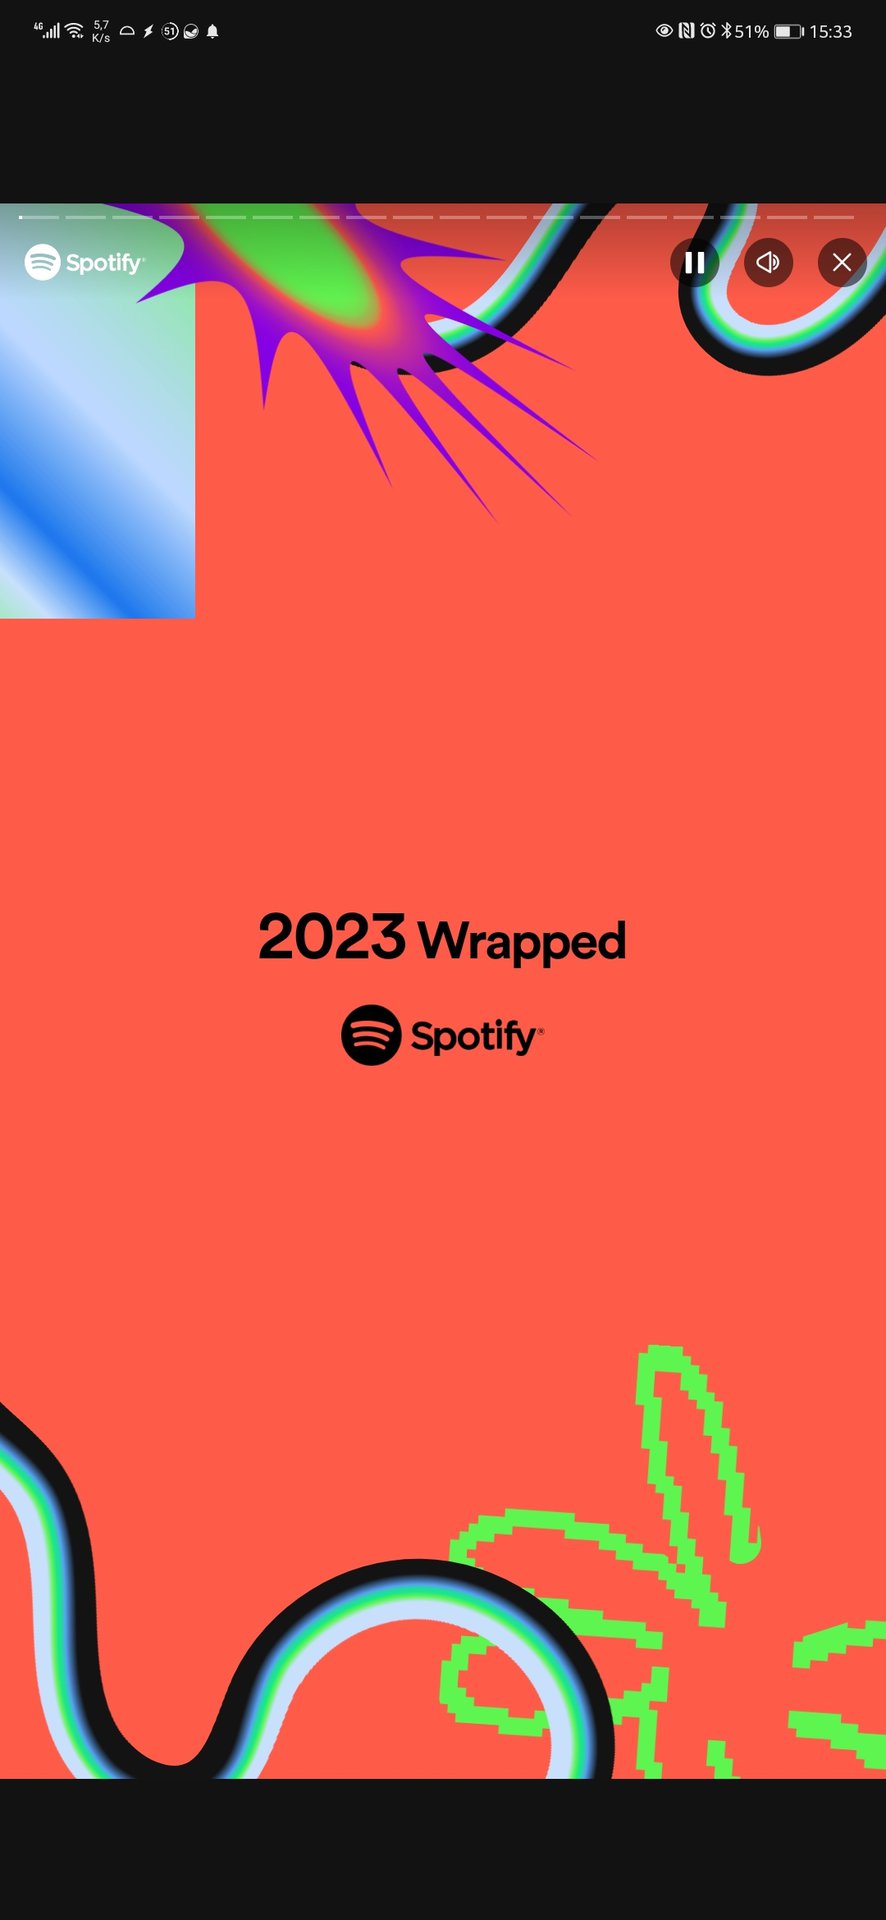 spotify wrapped cards 2023 1